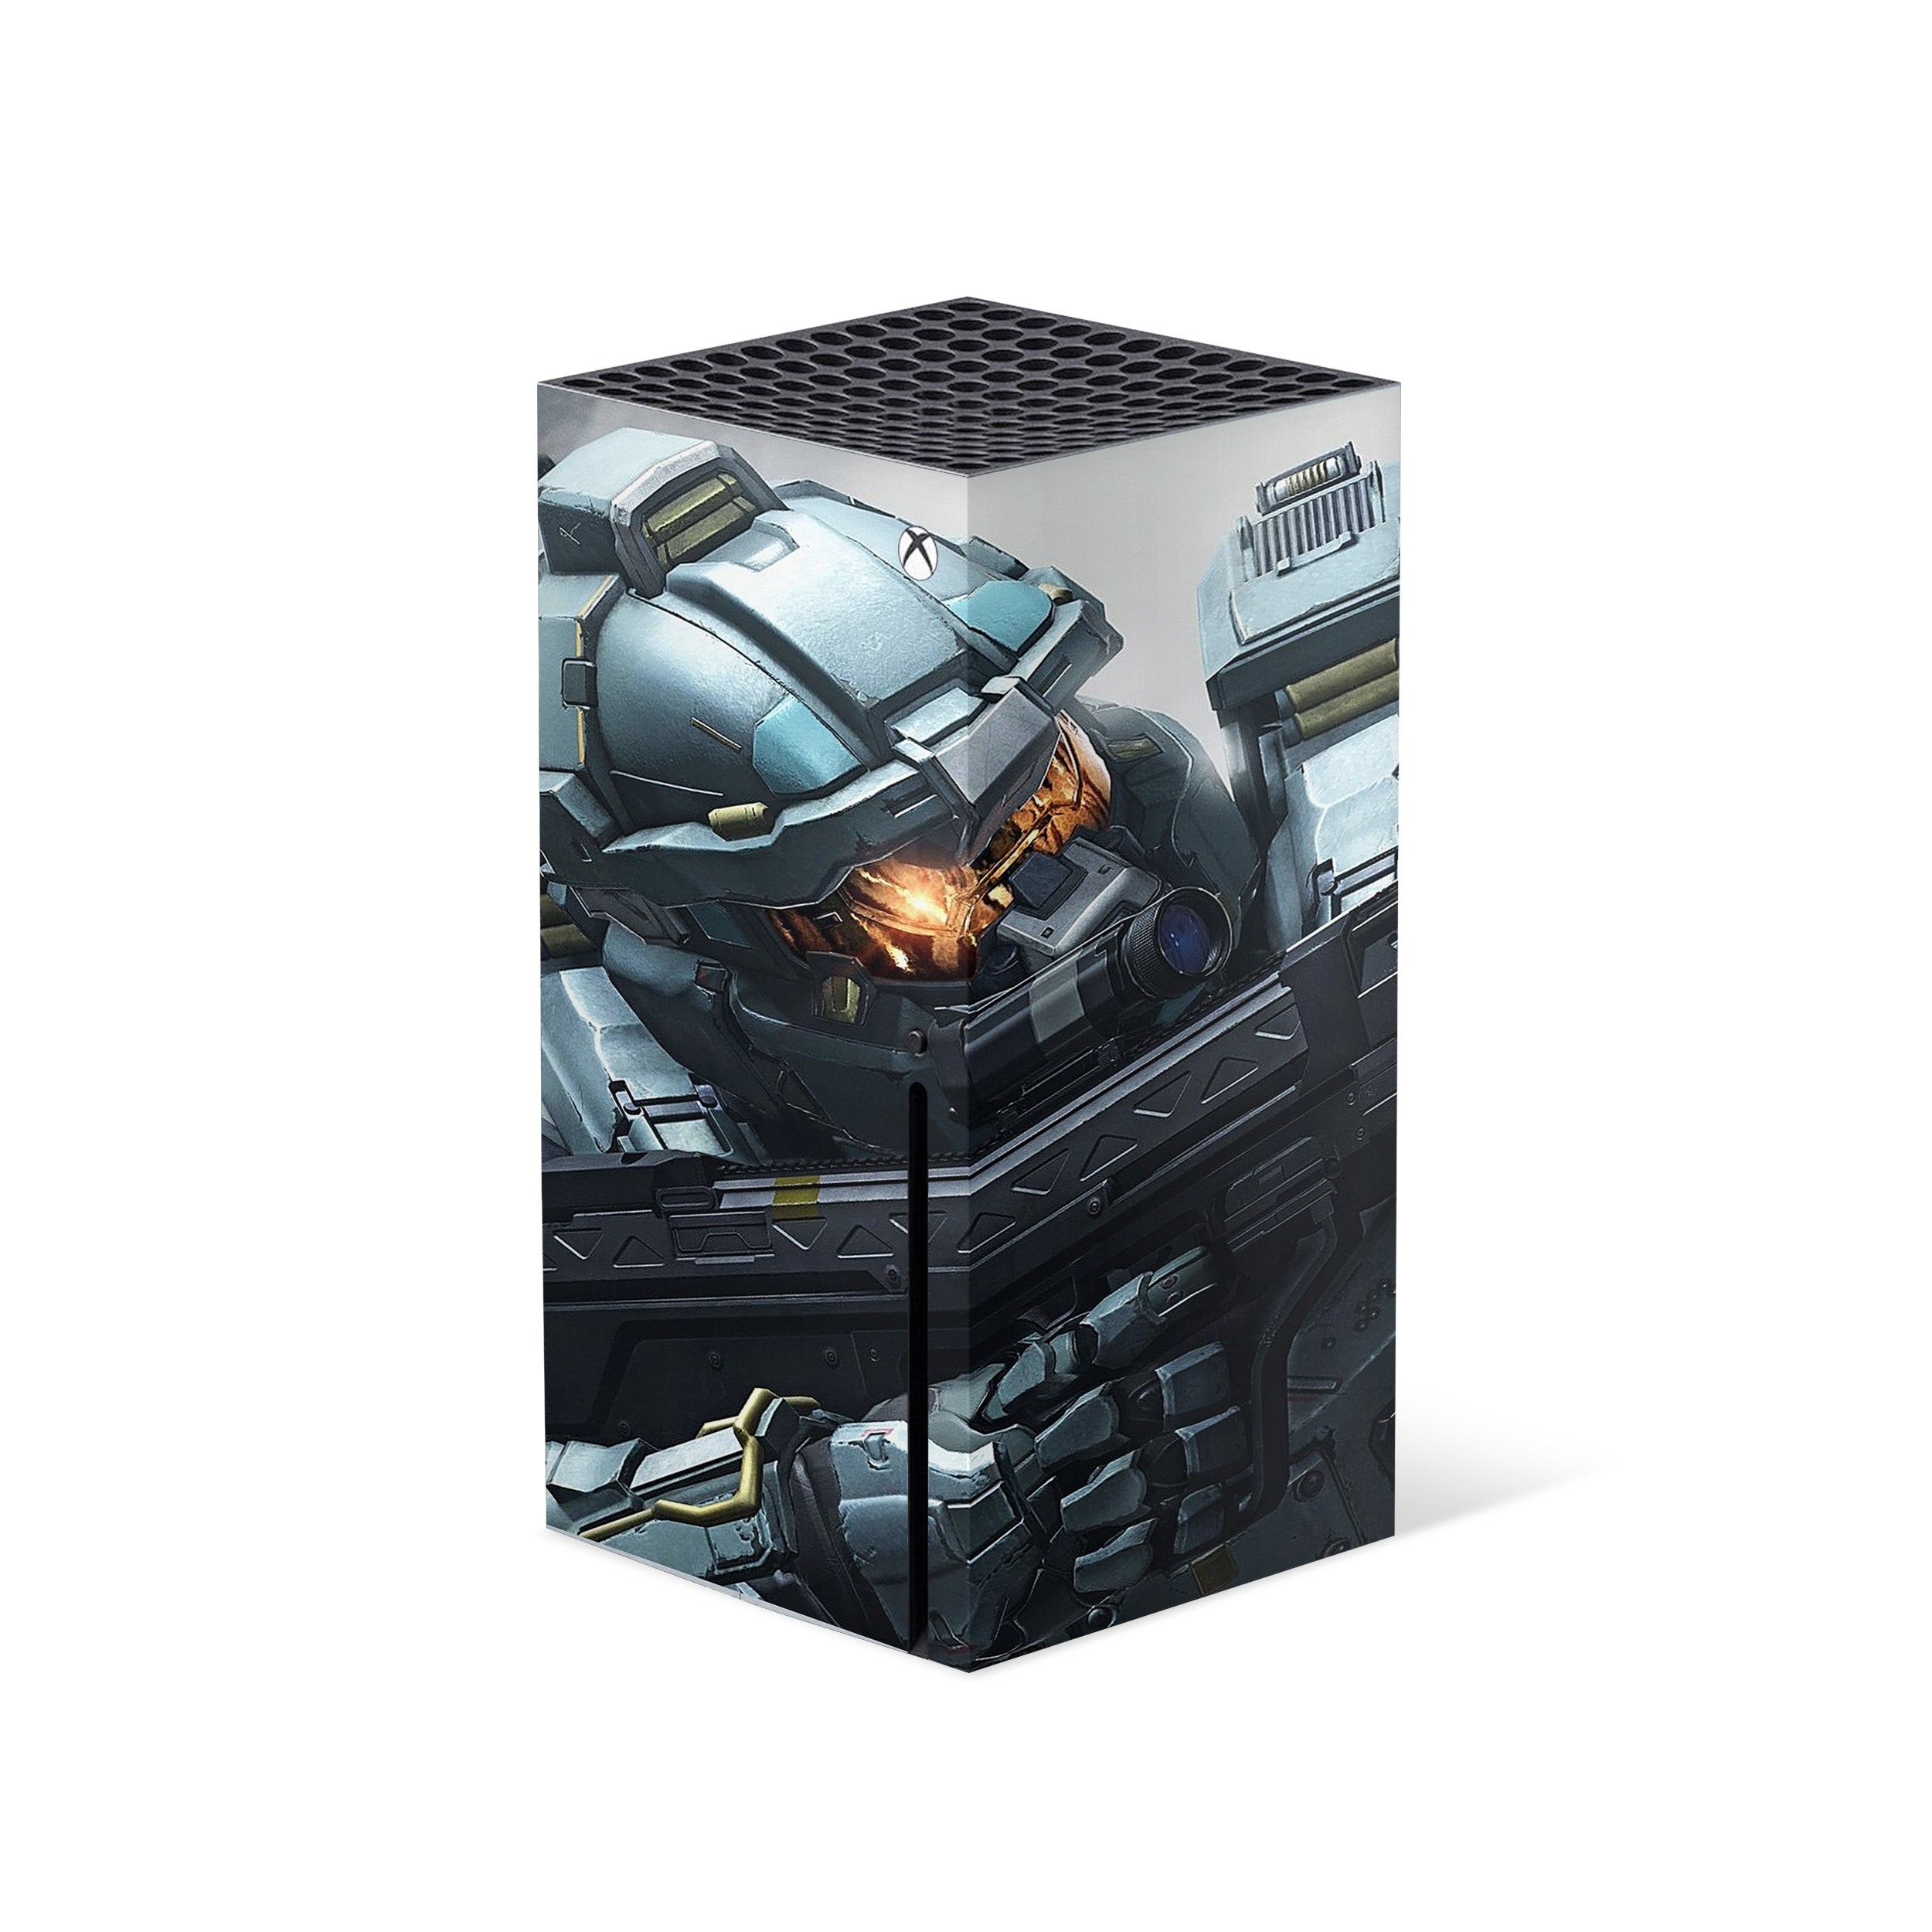 A video game skin featuring a Halo design for the Xbox Series X.